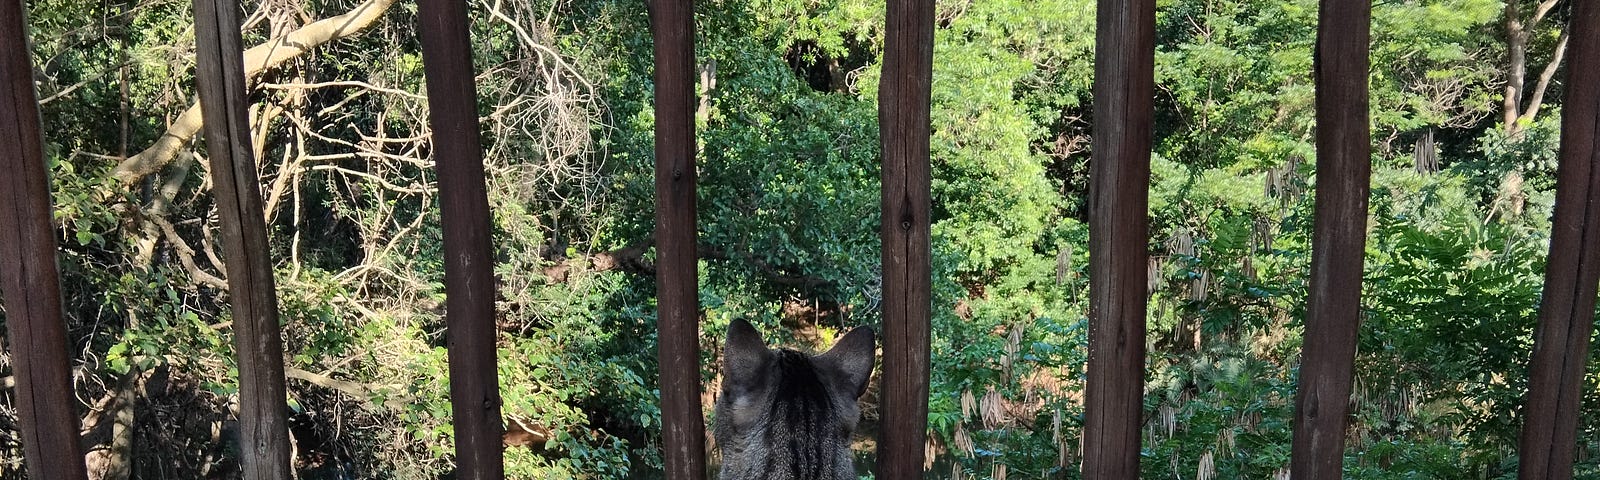 A spotted and striped cat staring at trees through a wooden railing having a great daydream